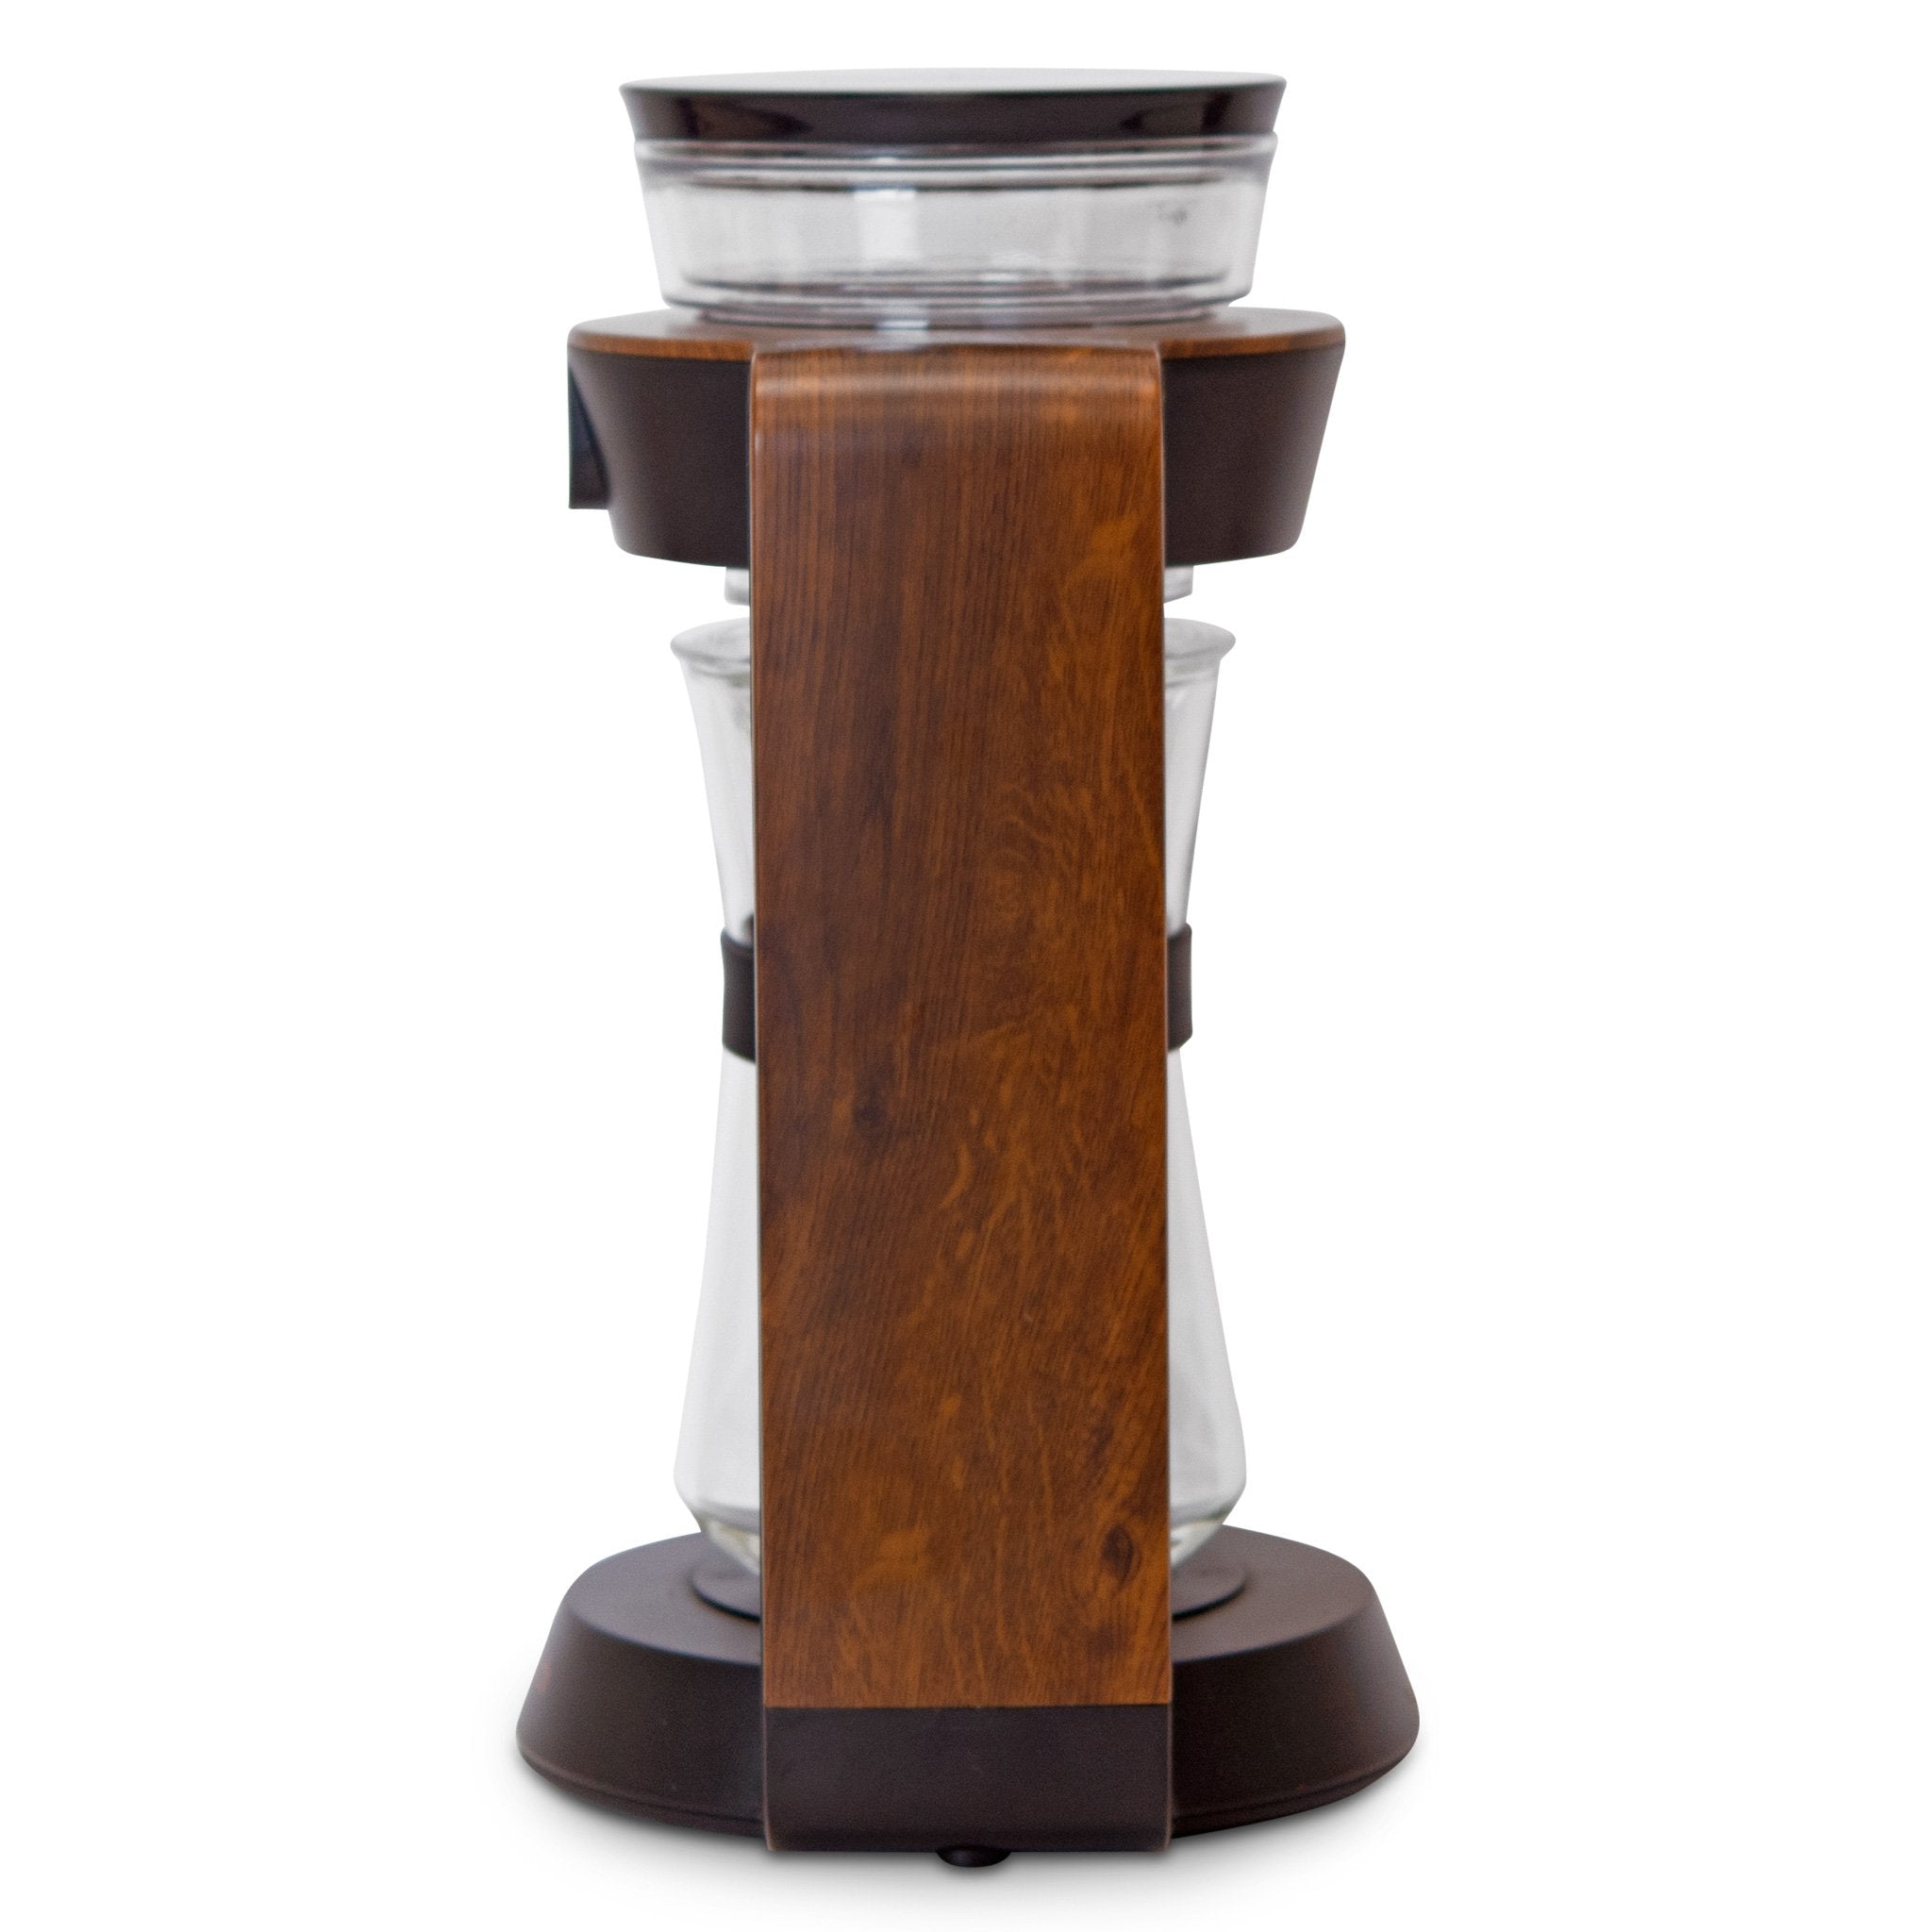 Shine Kitchen Co. by Tribest's New Automatic Cold Brew Machine